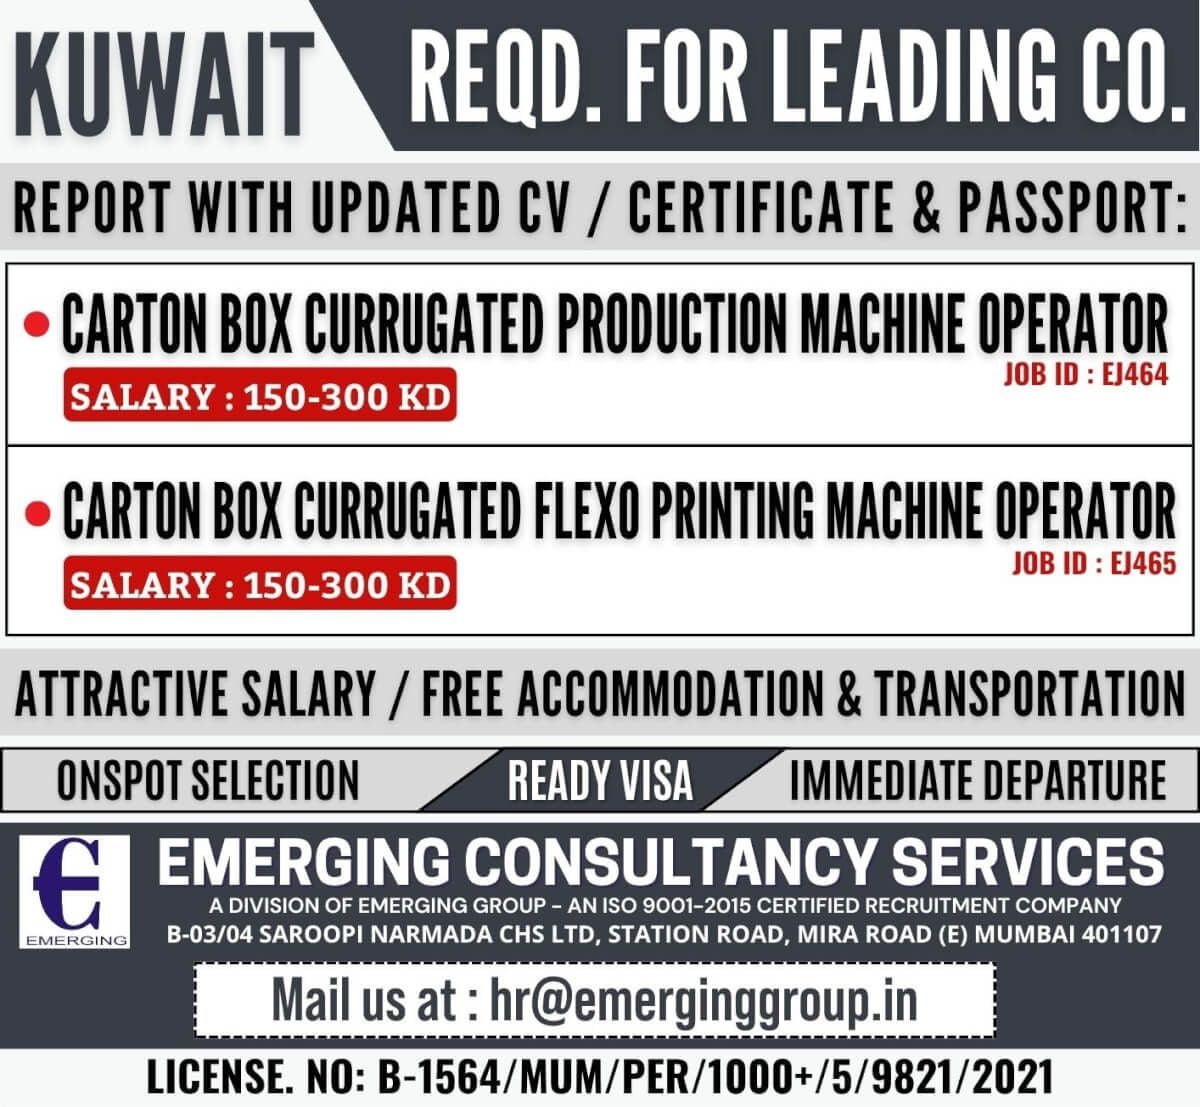 You are currently viewing Gulf Jobs | Urgent Hiring for leading company – Kuwait